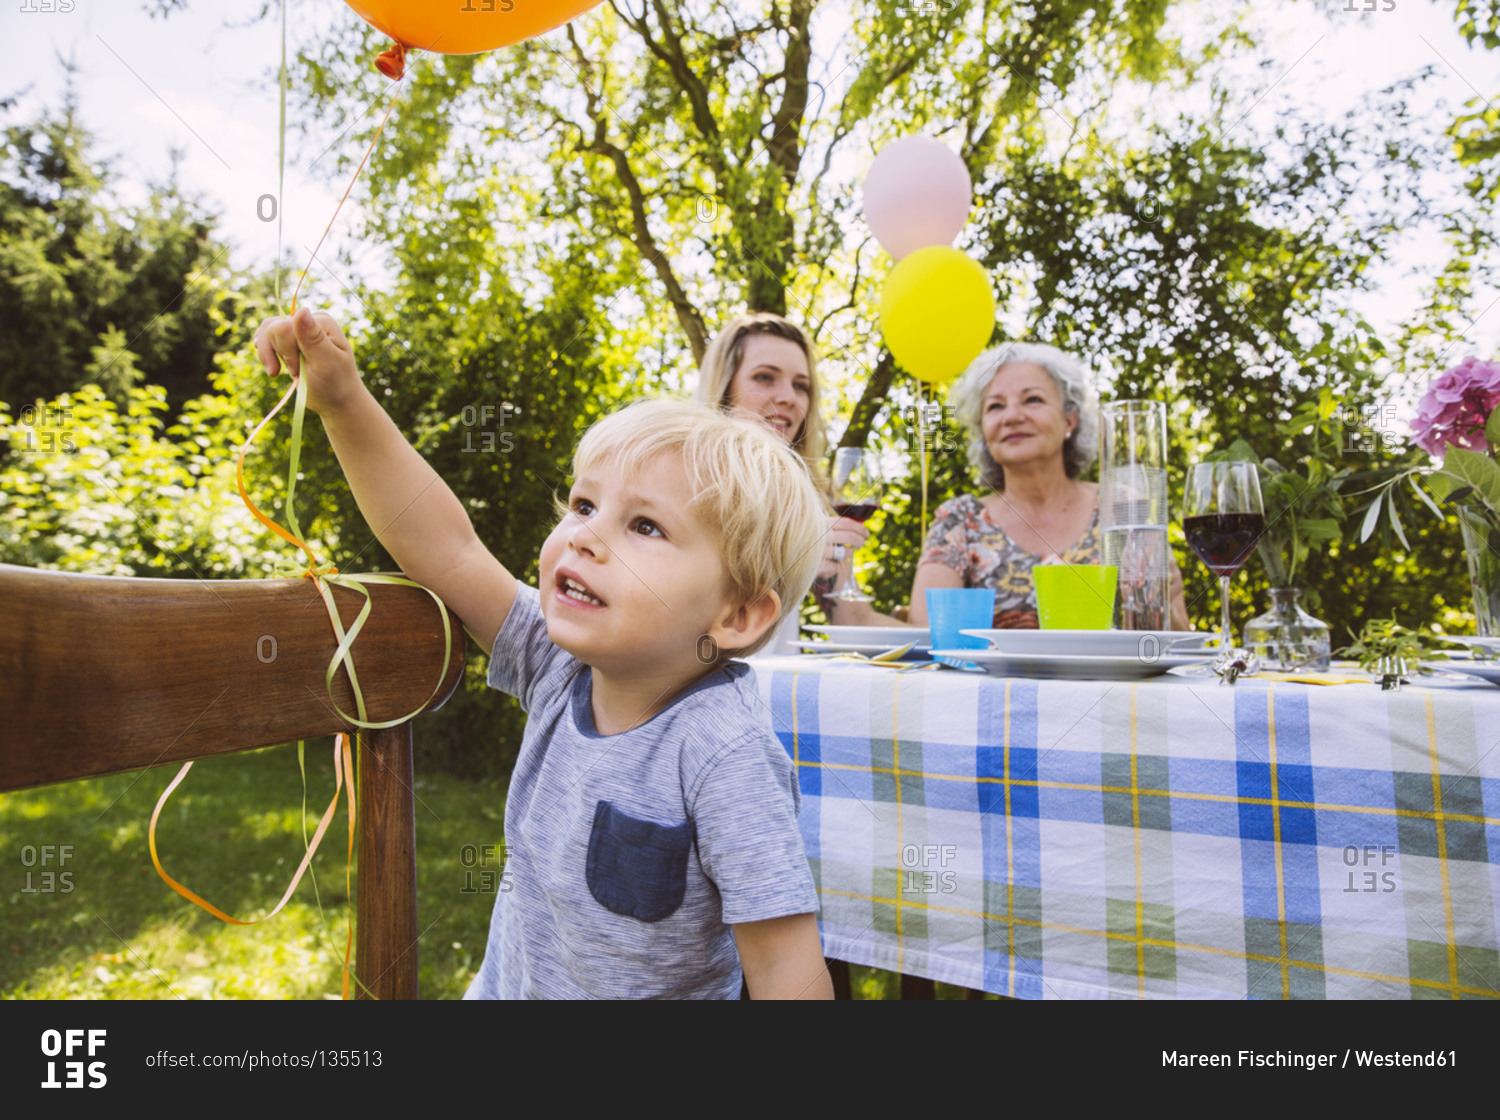 Boy at table with family of three generations in garden